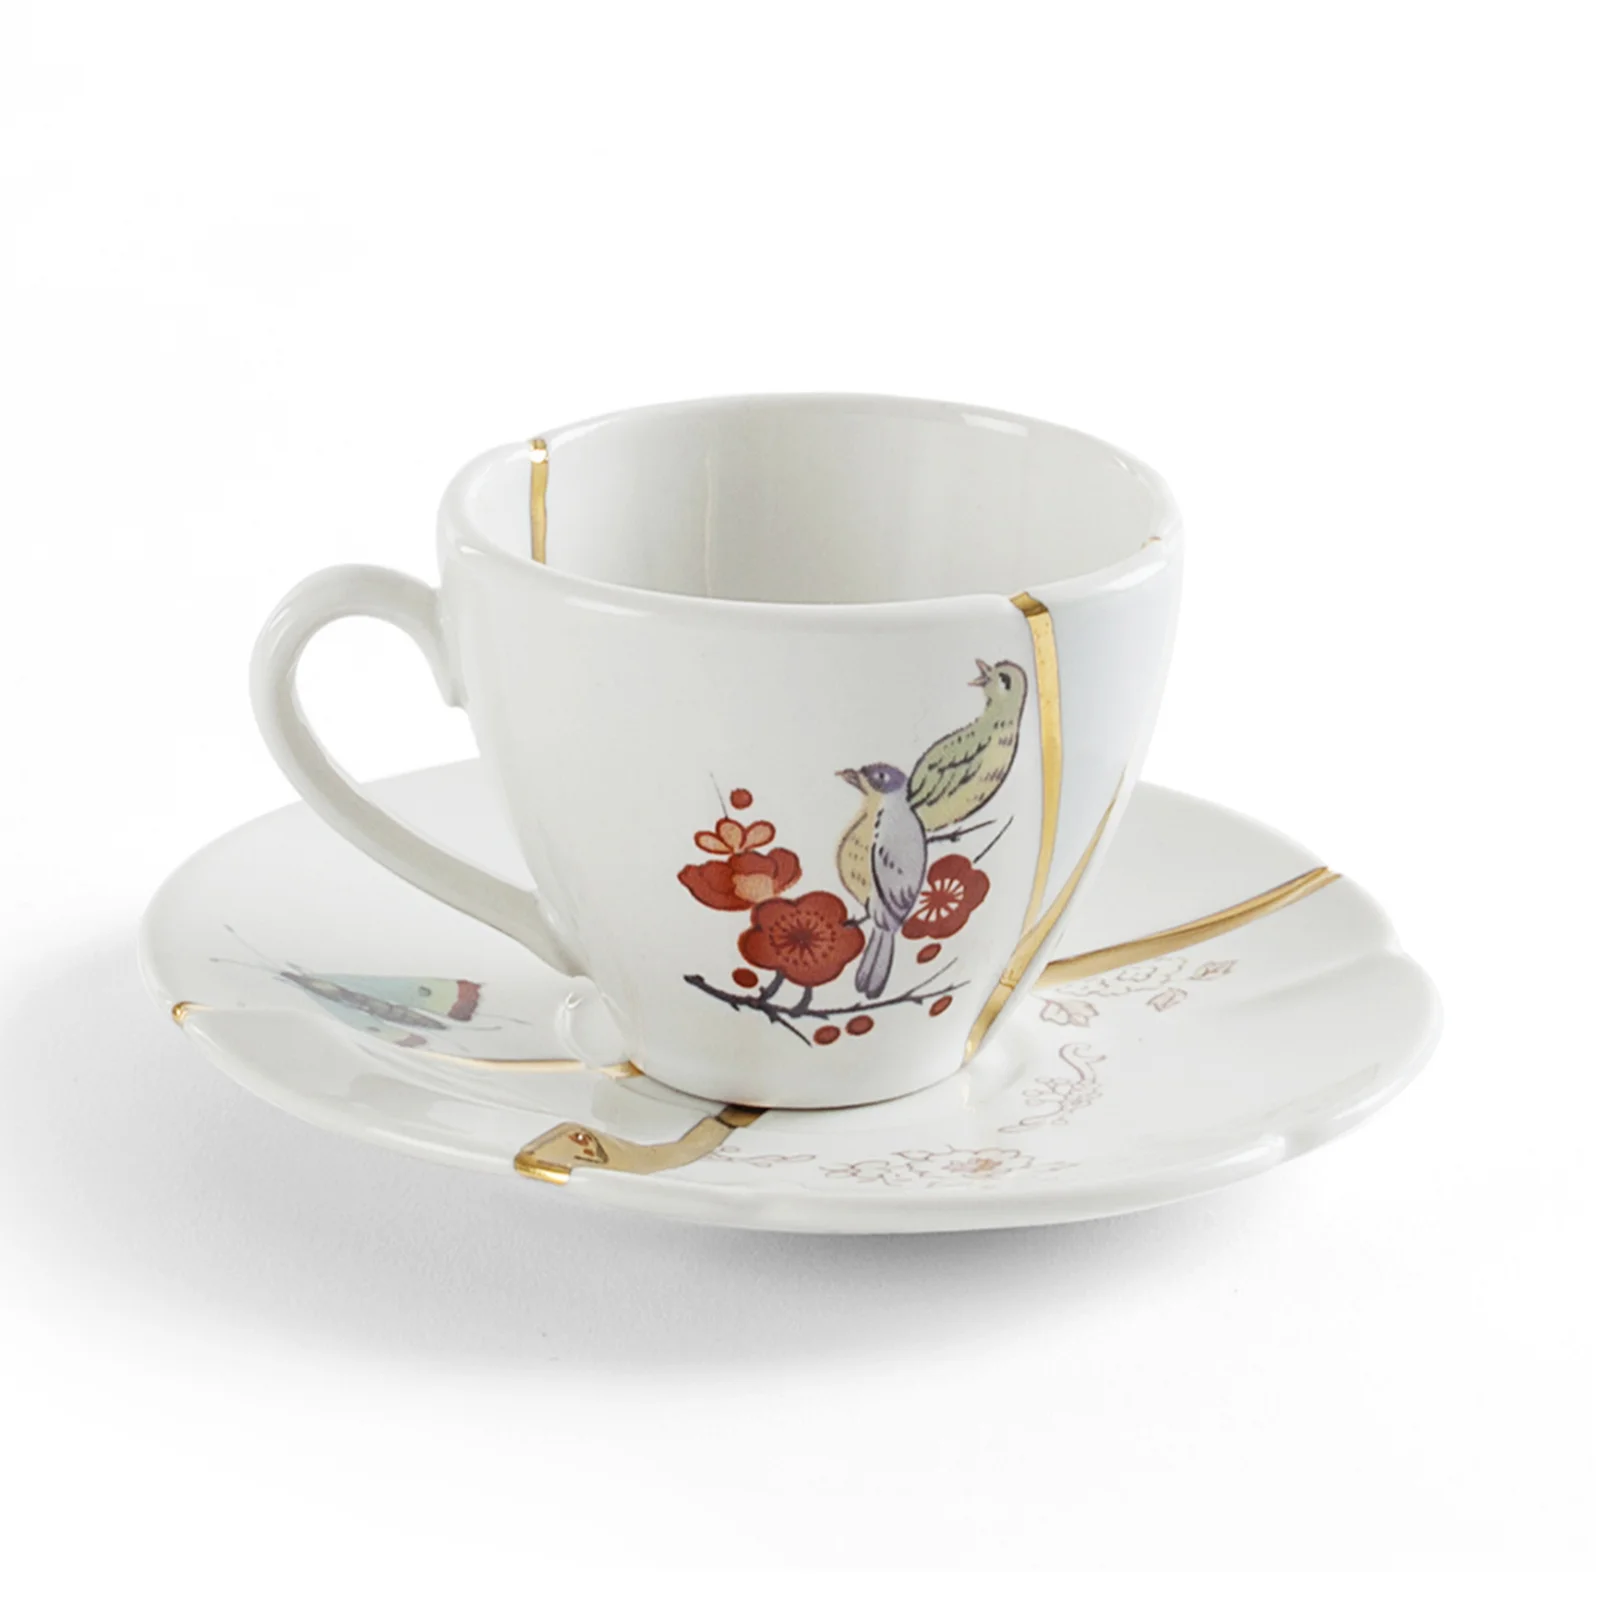 Seletti Kintsugi Coffee Cup and Saucer - Red Image 1